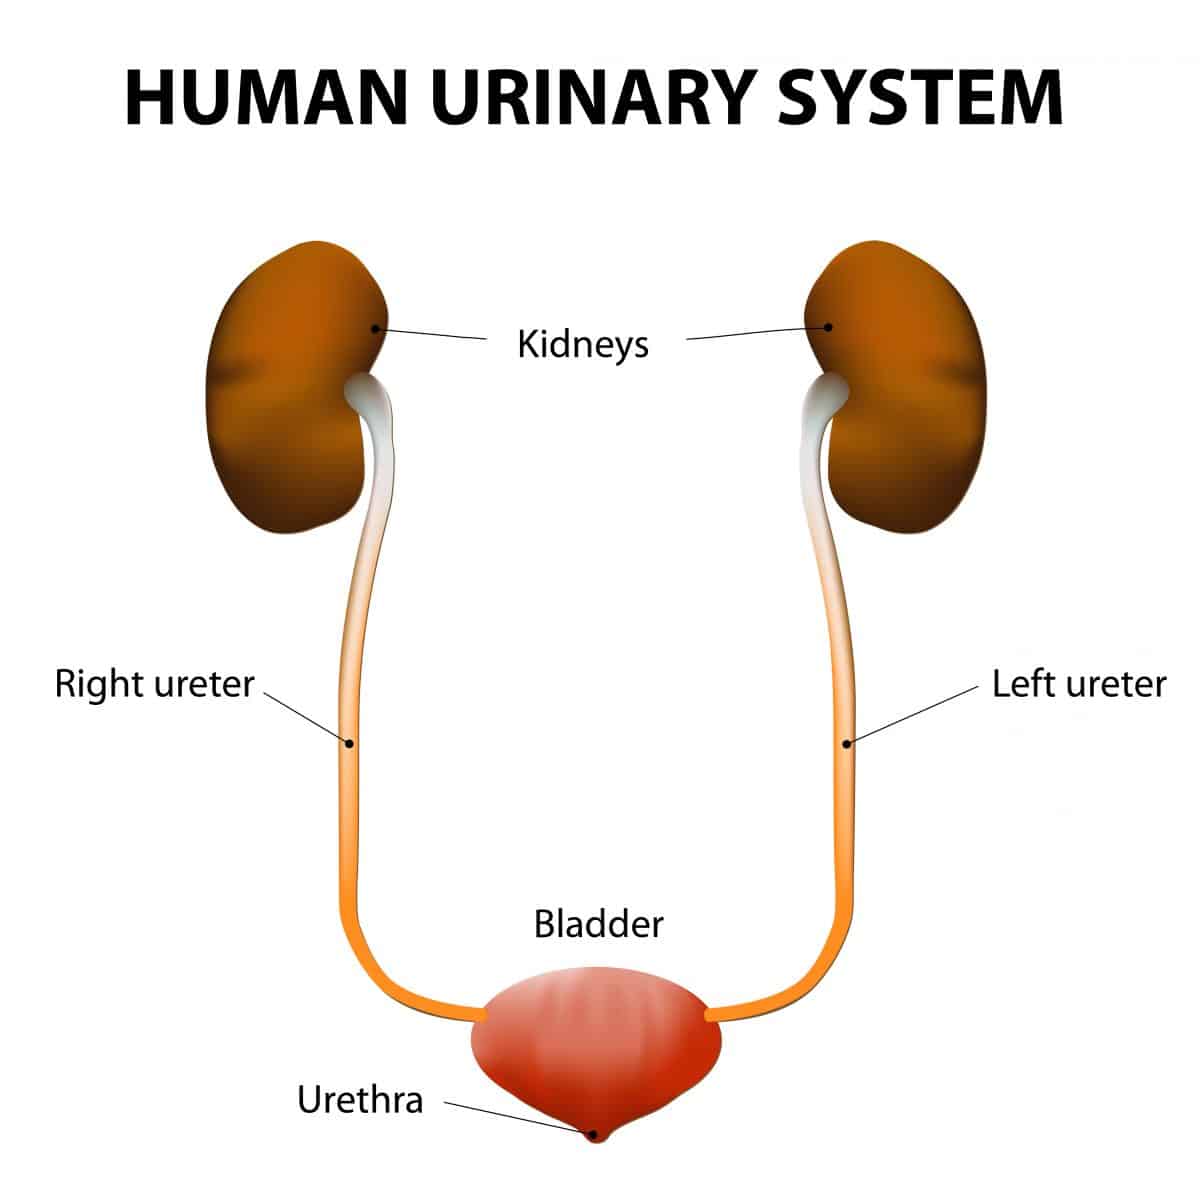 How to Prevent a UTI: 6 Healthy Tips to Avoid a Urinary Tract Infection